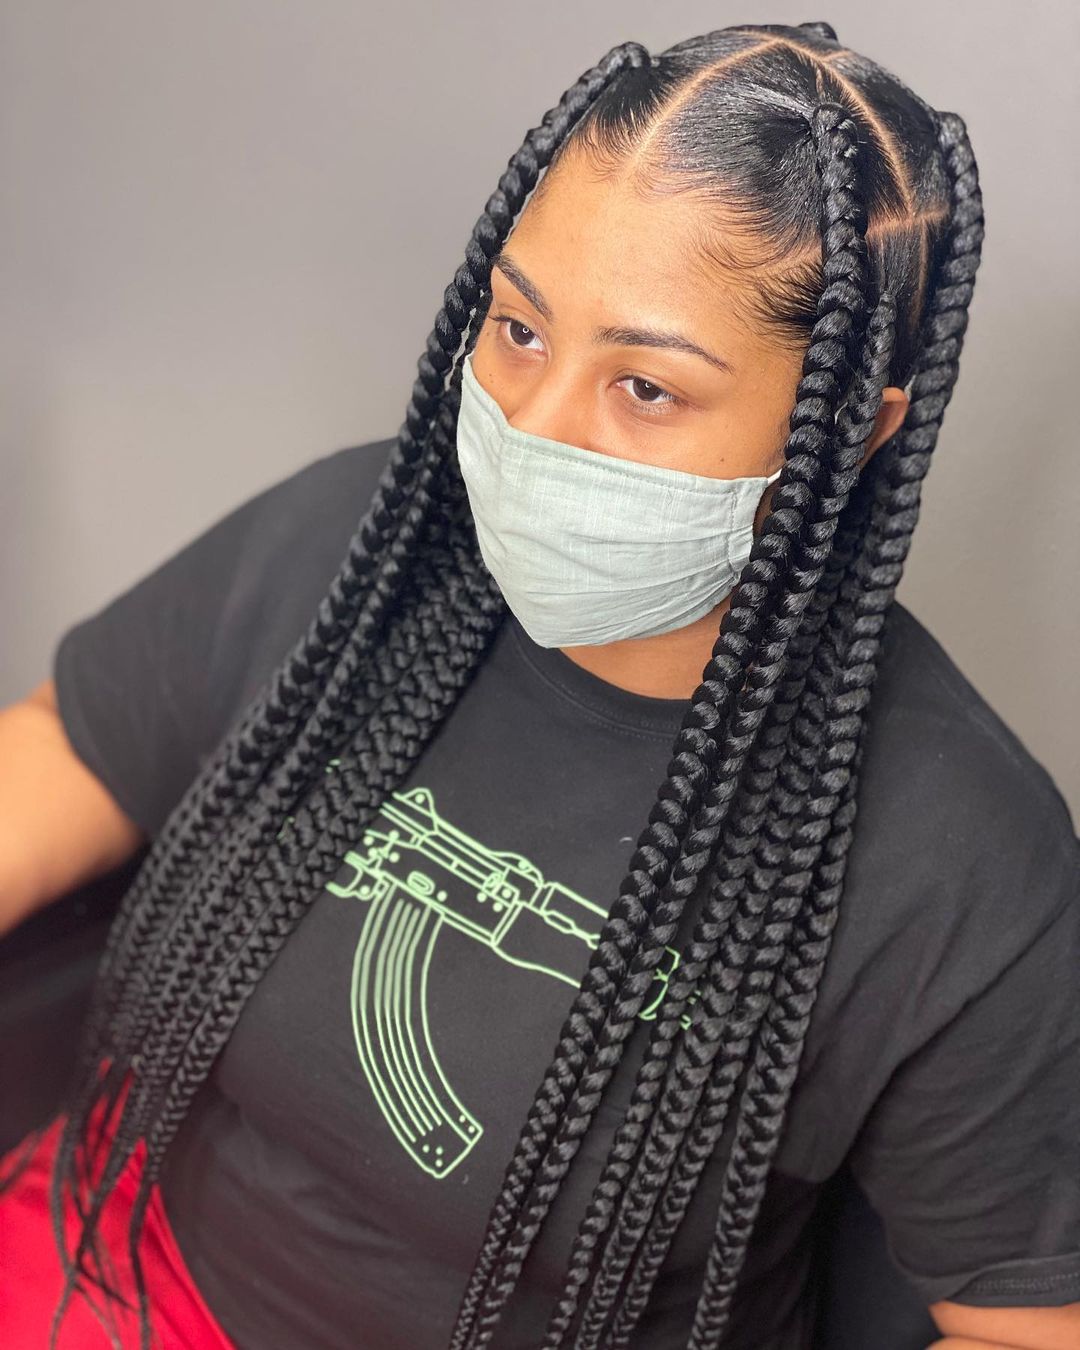 20 Trending Knotless Braids Hairstyles To Try out Now. - Trybeinfo